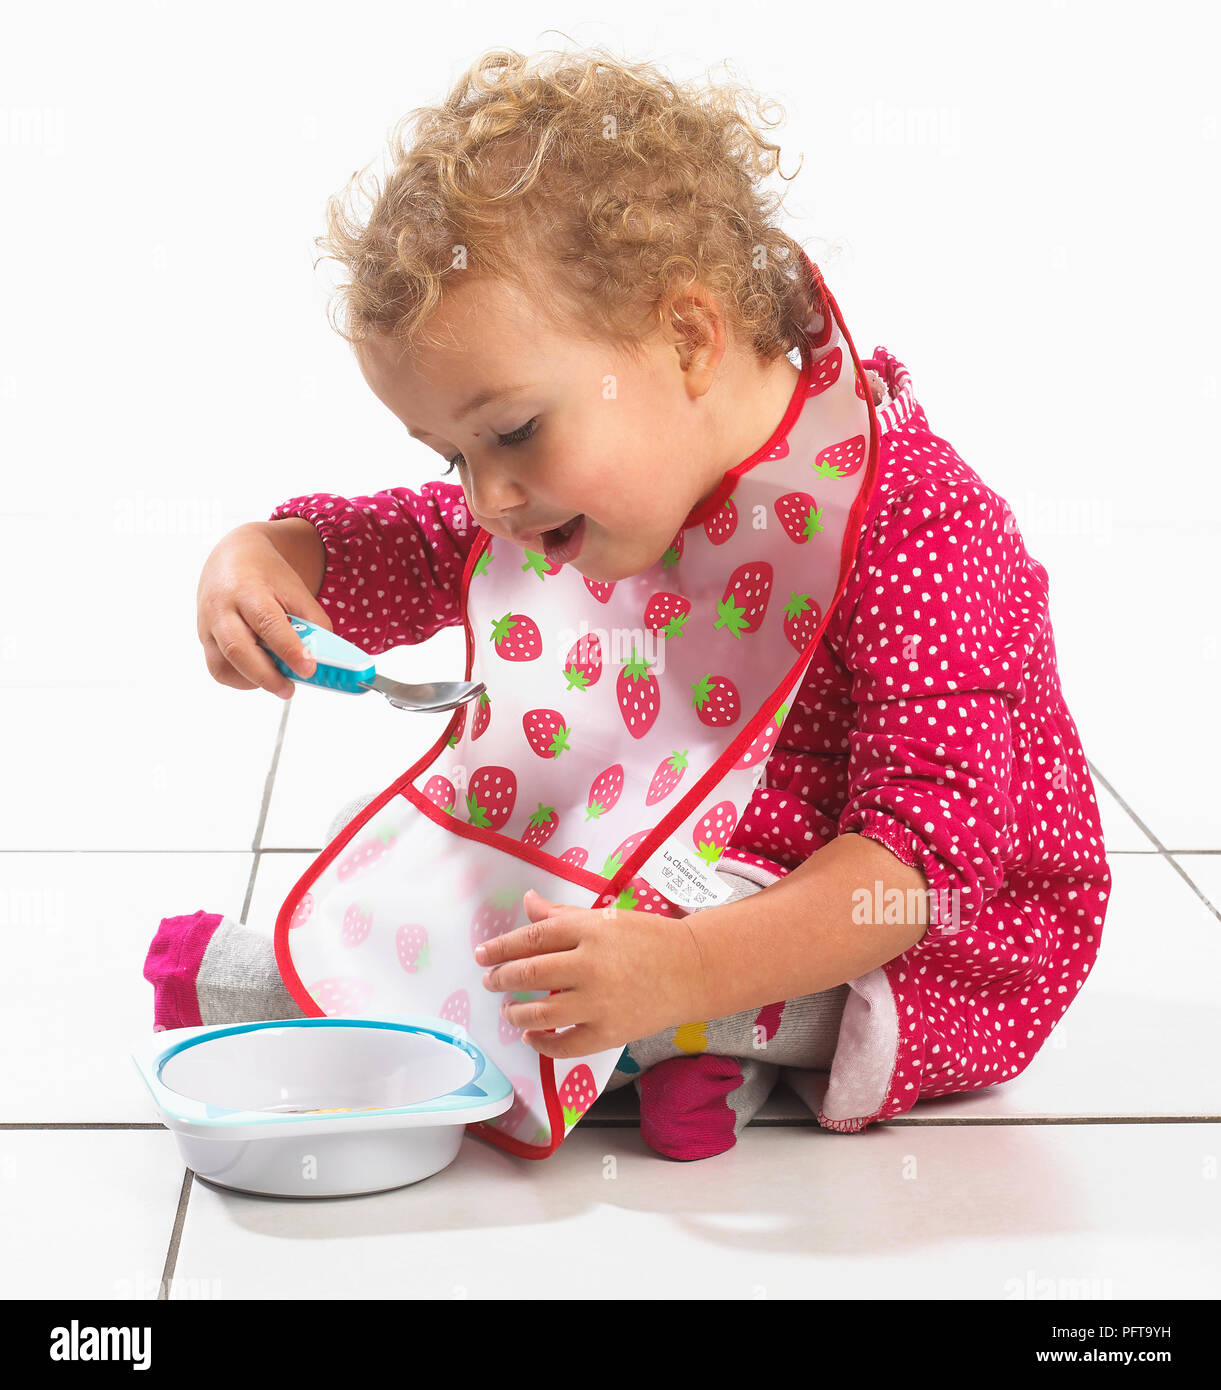 Girl (2 years) holding bowl and eating from spoon Stock Photo